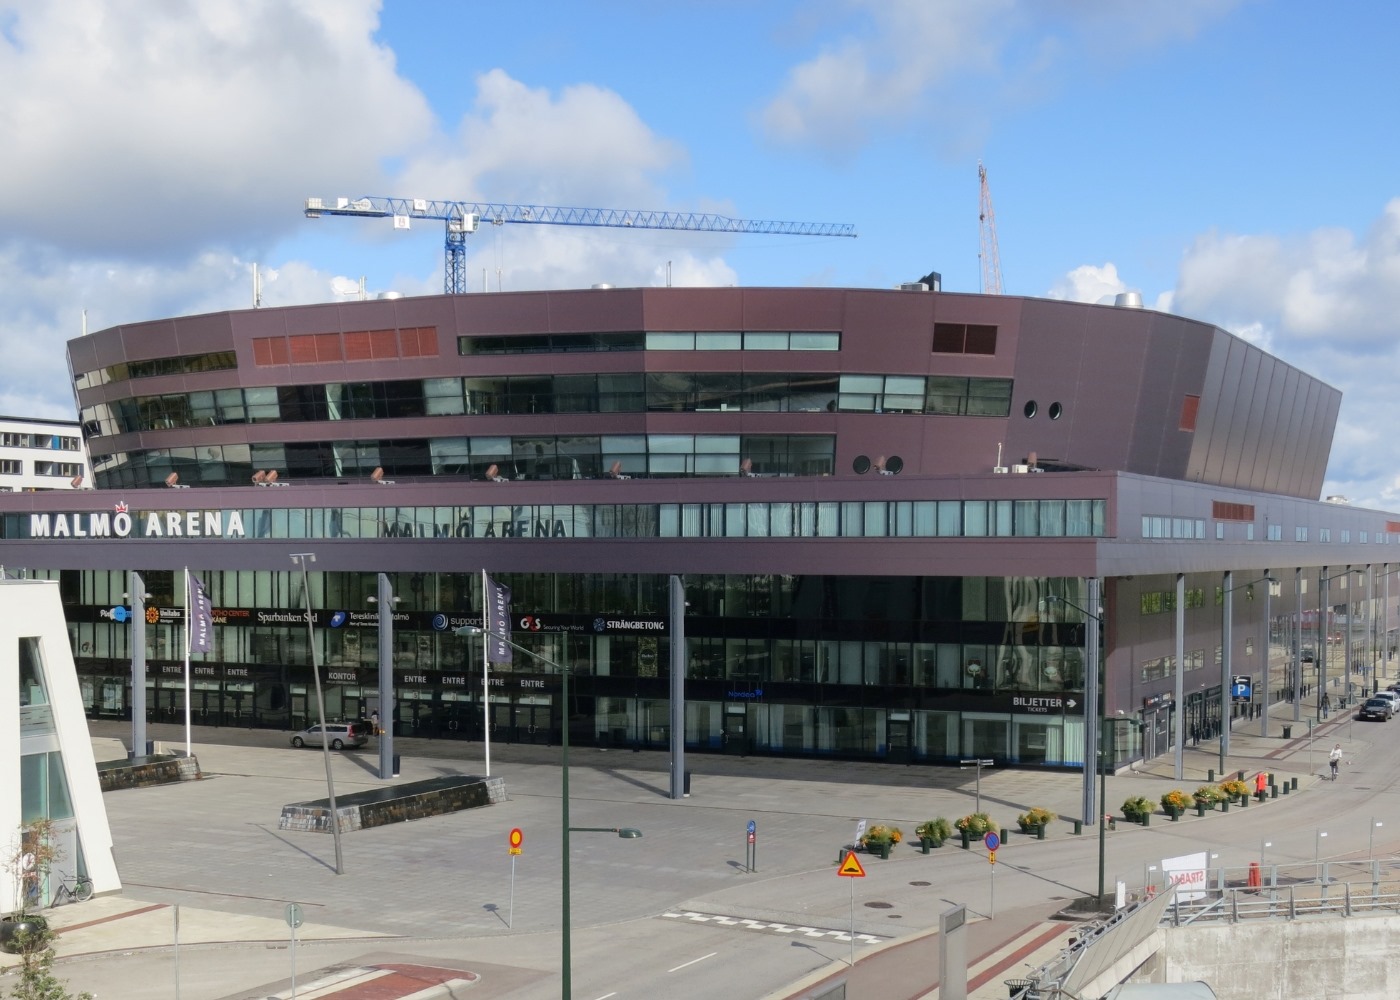 10-unbelievable-facts-about-malmo-arena